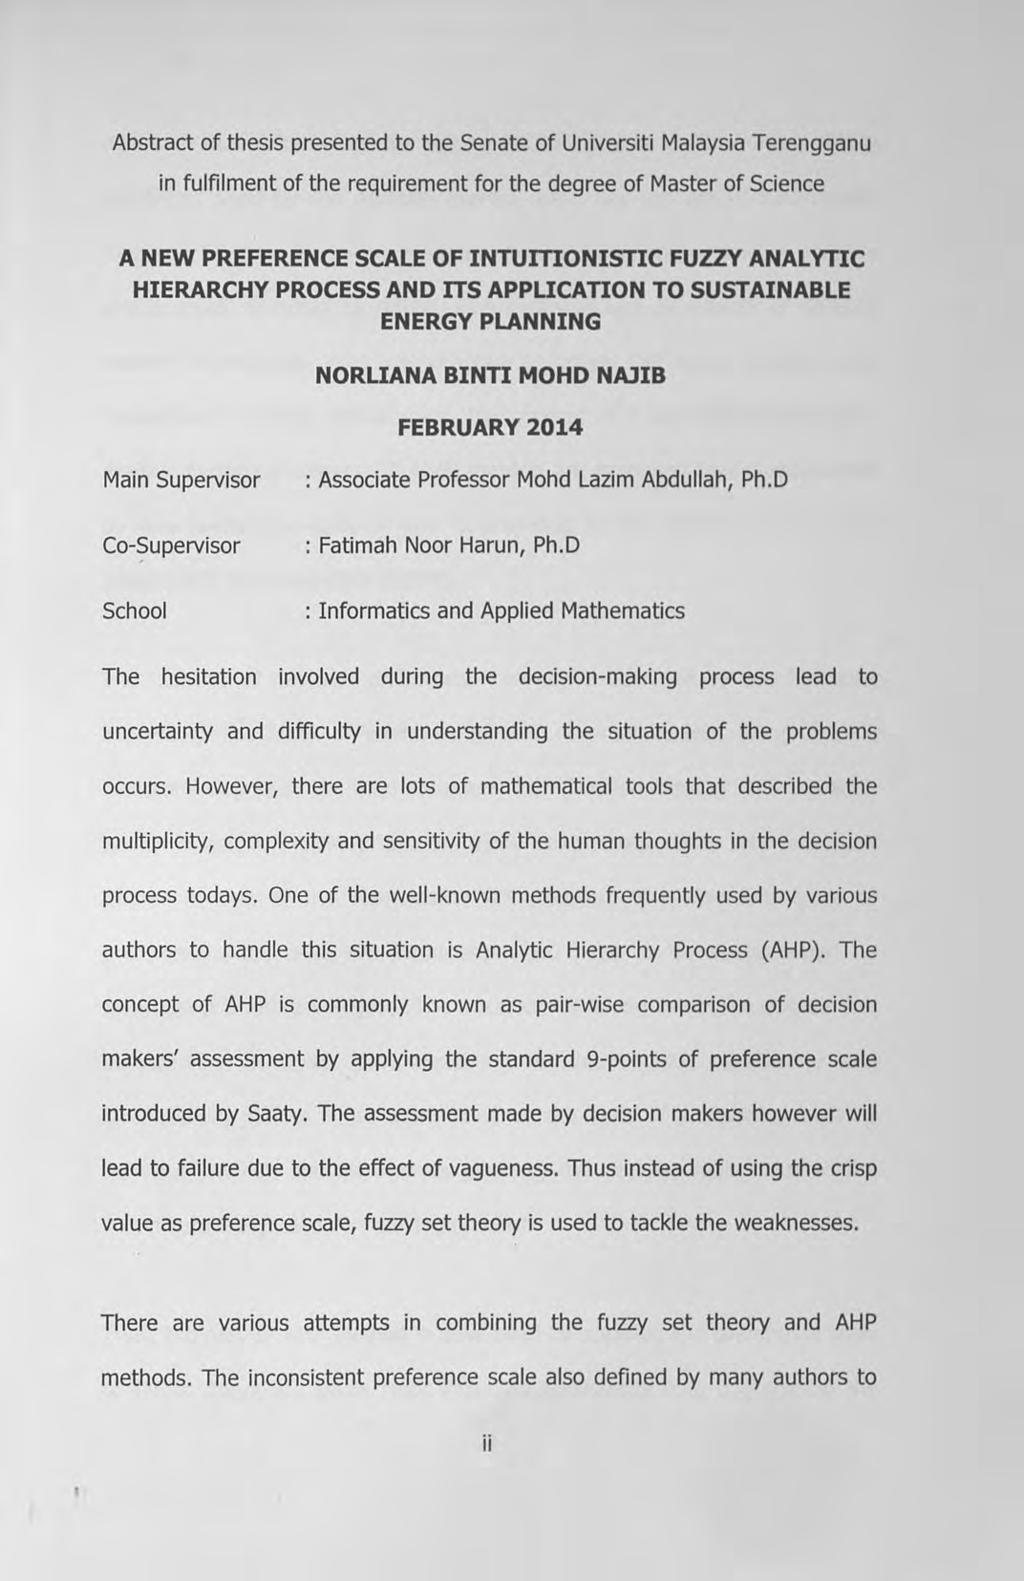 Abstract of thesis presented to the Senate of Universiti Malaysia Terengganu in fulfilment of the requirement for the degree of Master of Science A NEW PREFERENCE SCALE OF INTUIDONISTIC FUZZY